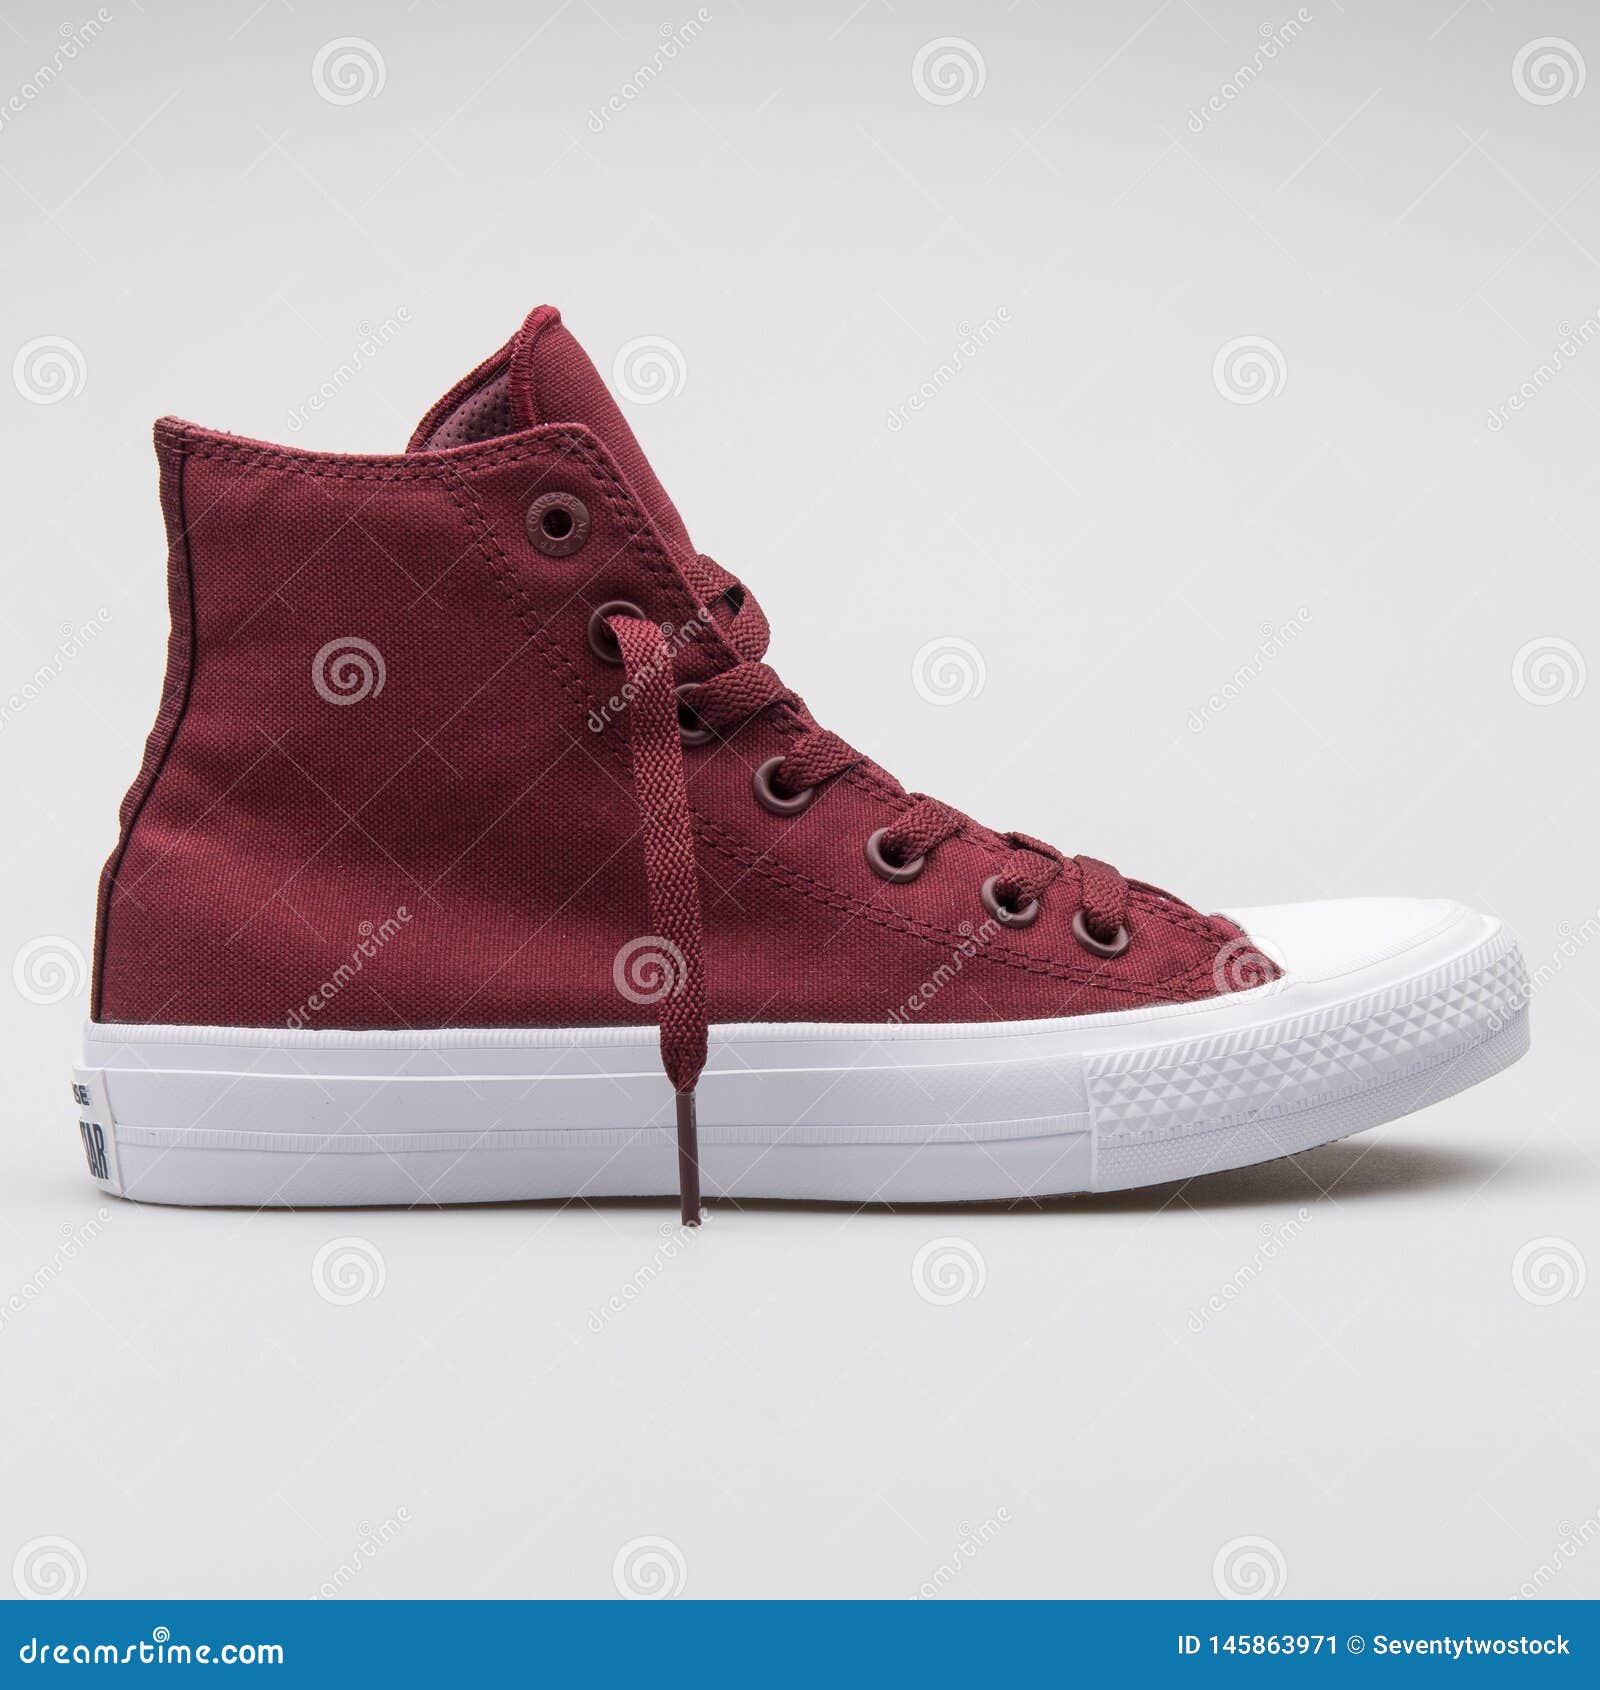 Converse Chuck Taylor All Star High Bordeaux Red Sneaker Editorial ...